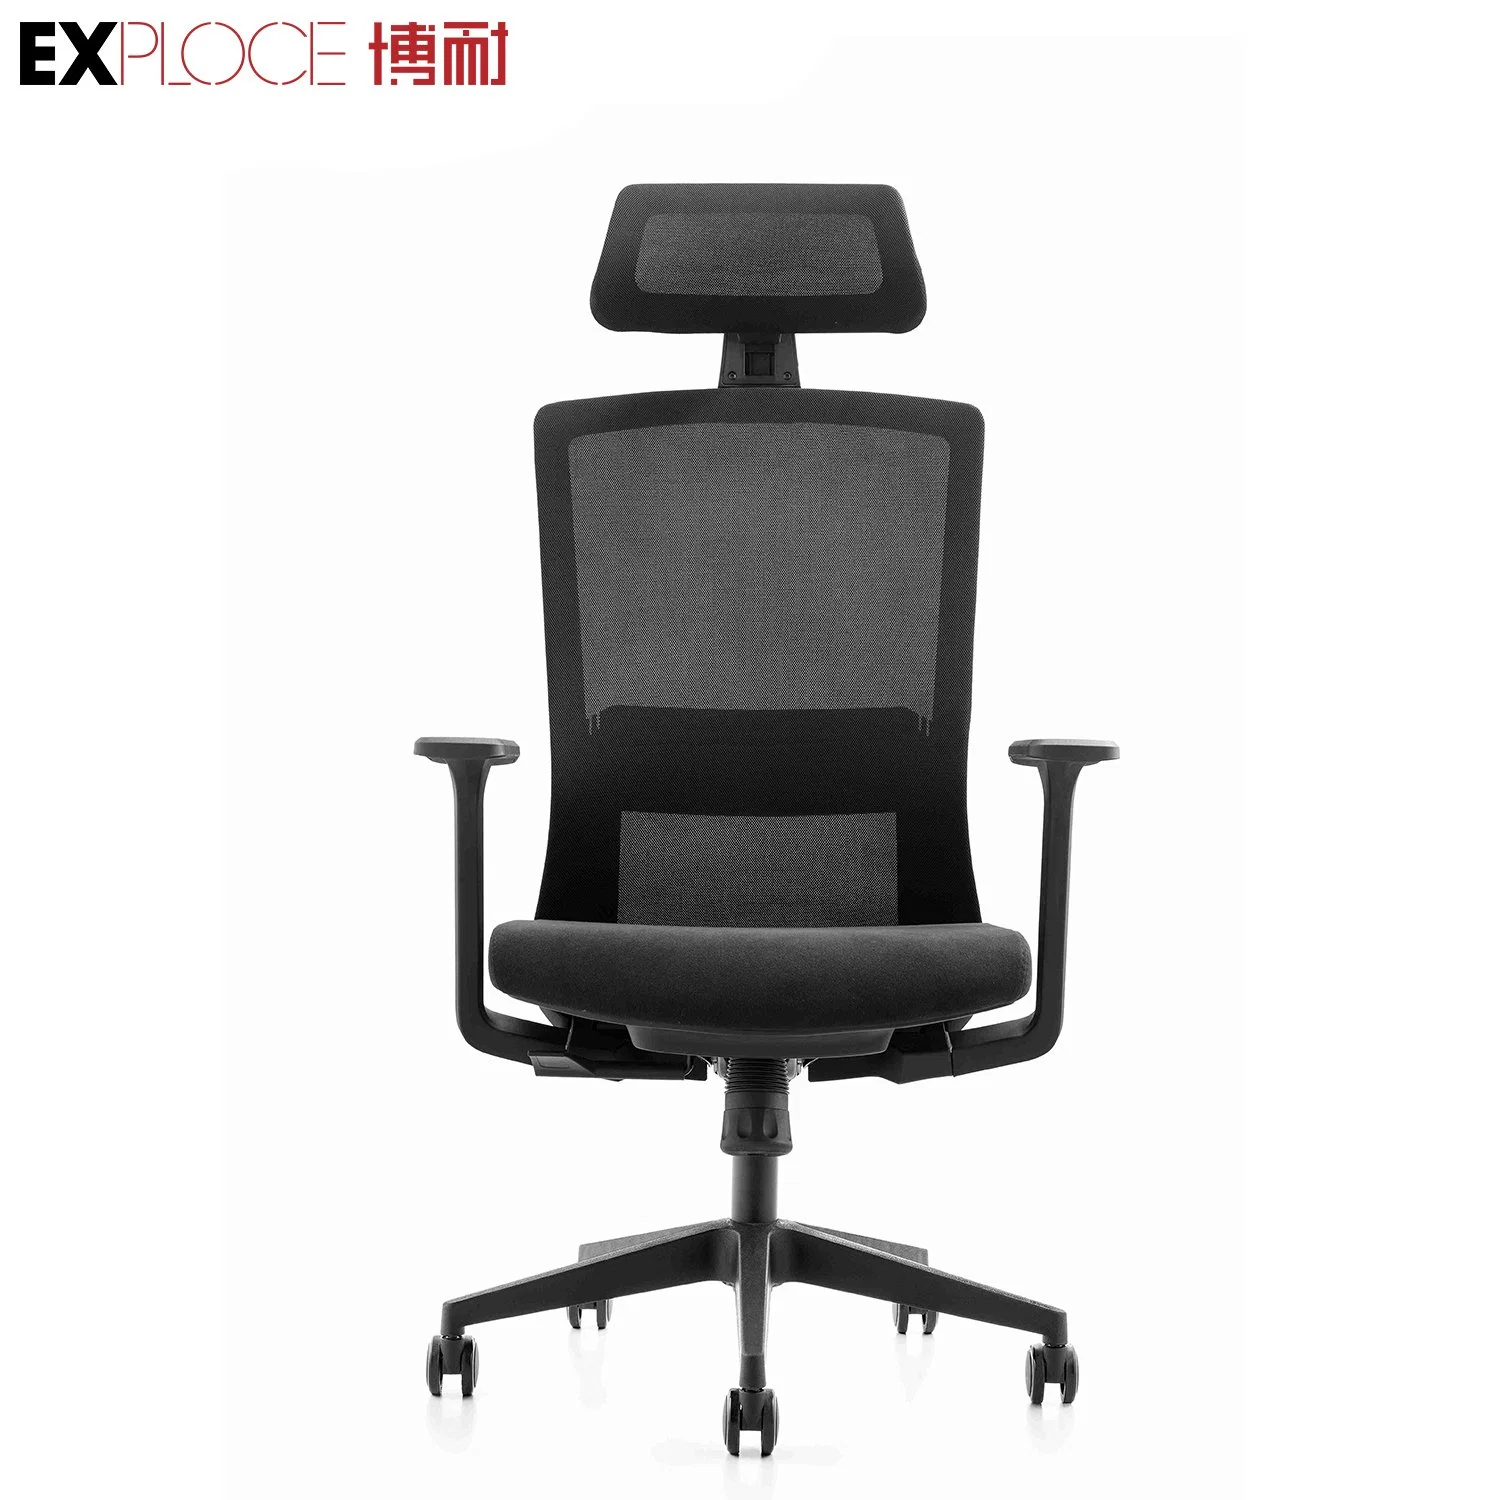 Chinese Manufacturer Commercial Furniture Ergonomic Height Adjustable Gaming Mesh Chair High Back Executive Office Chair Sale